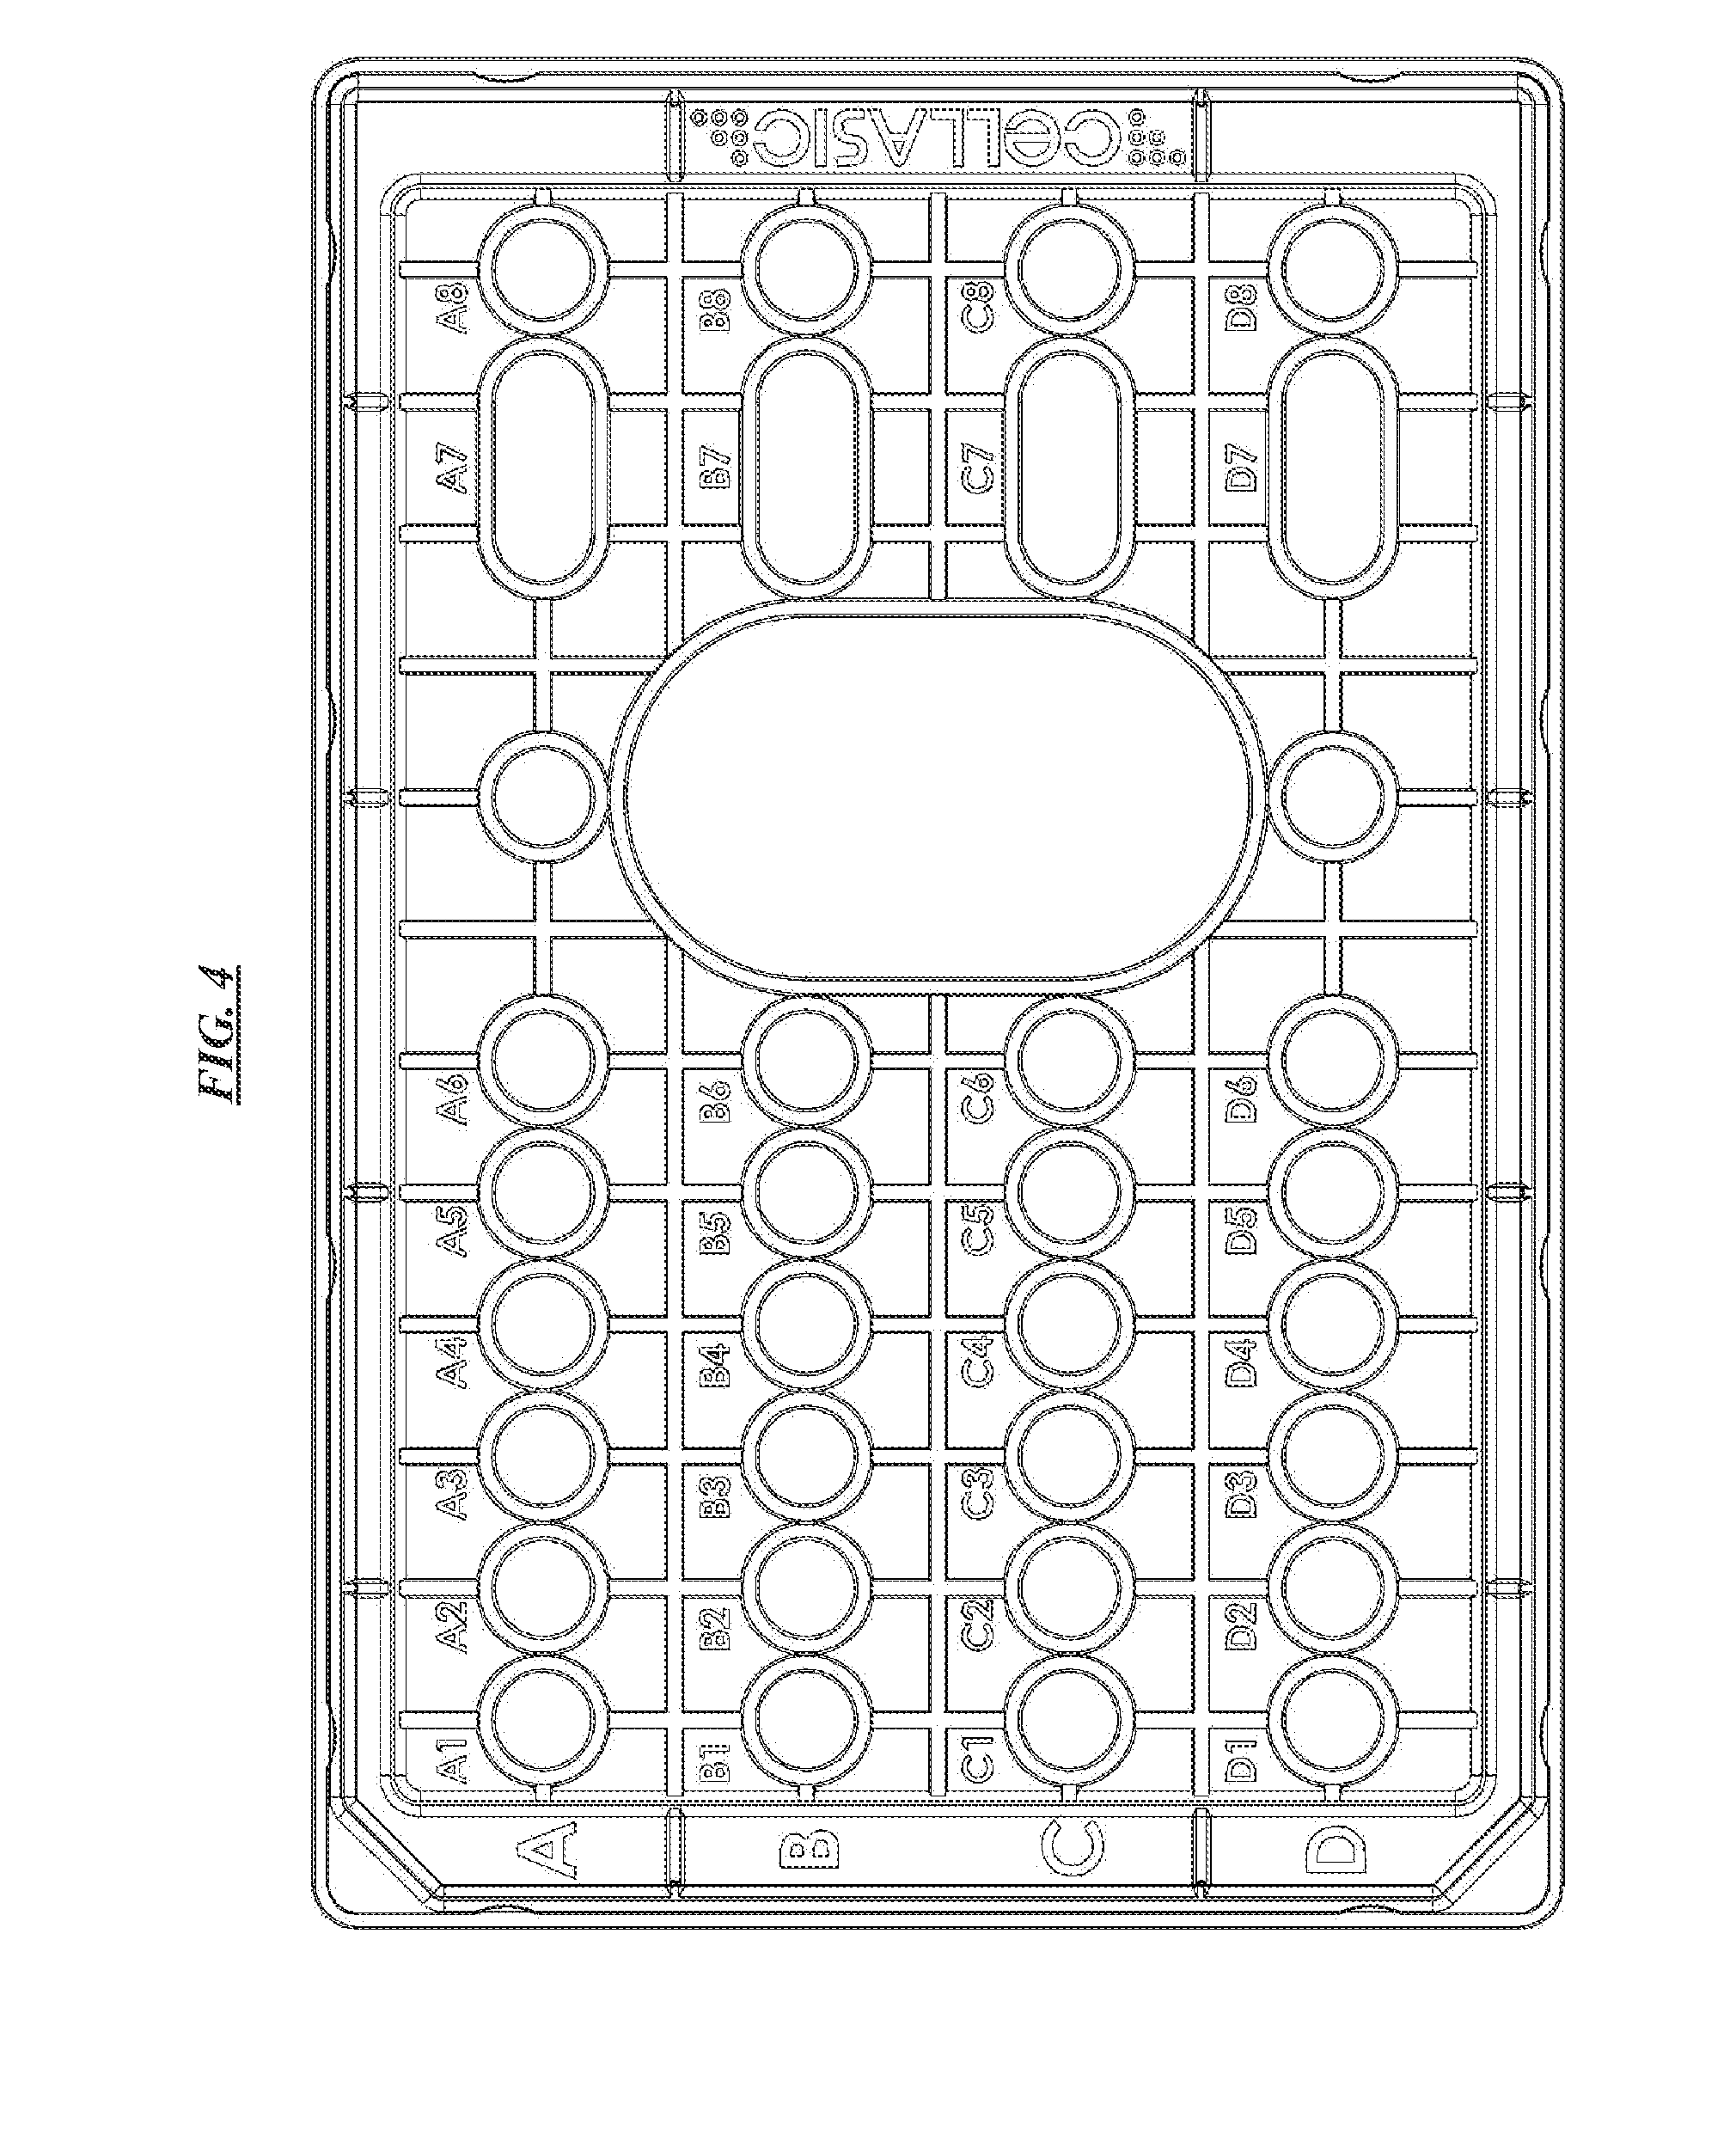 Micro-Incubation Systems For Microfluidic Cell Culture And Methods